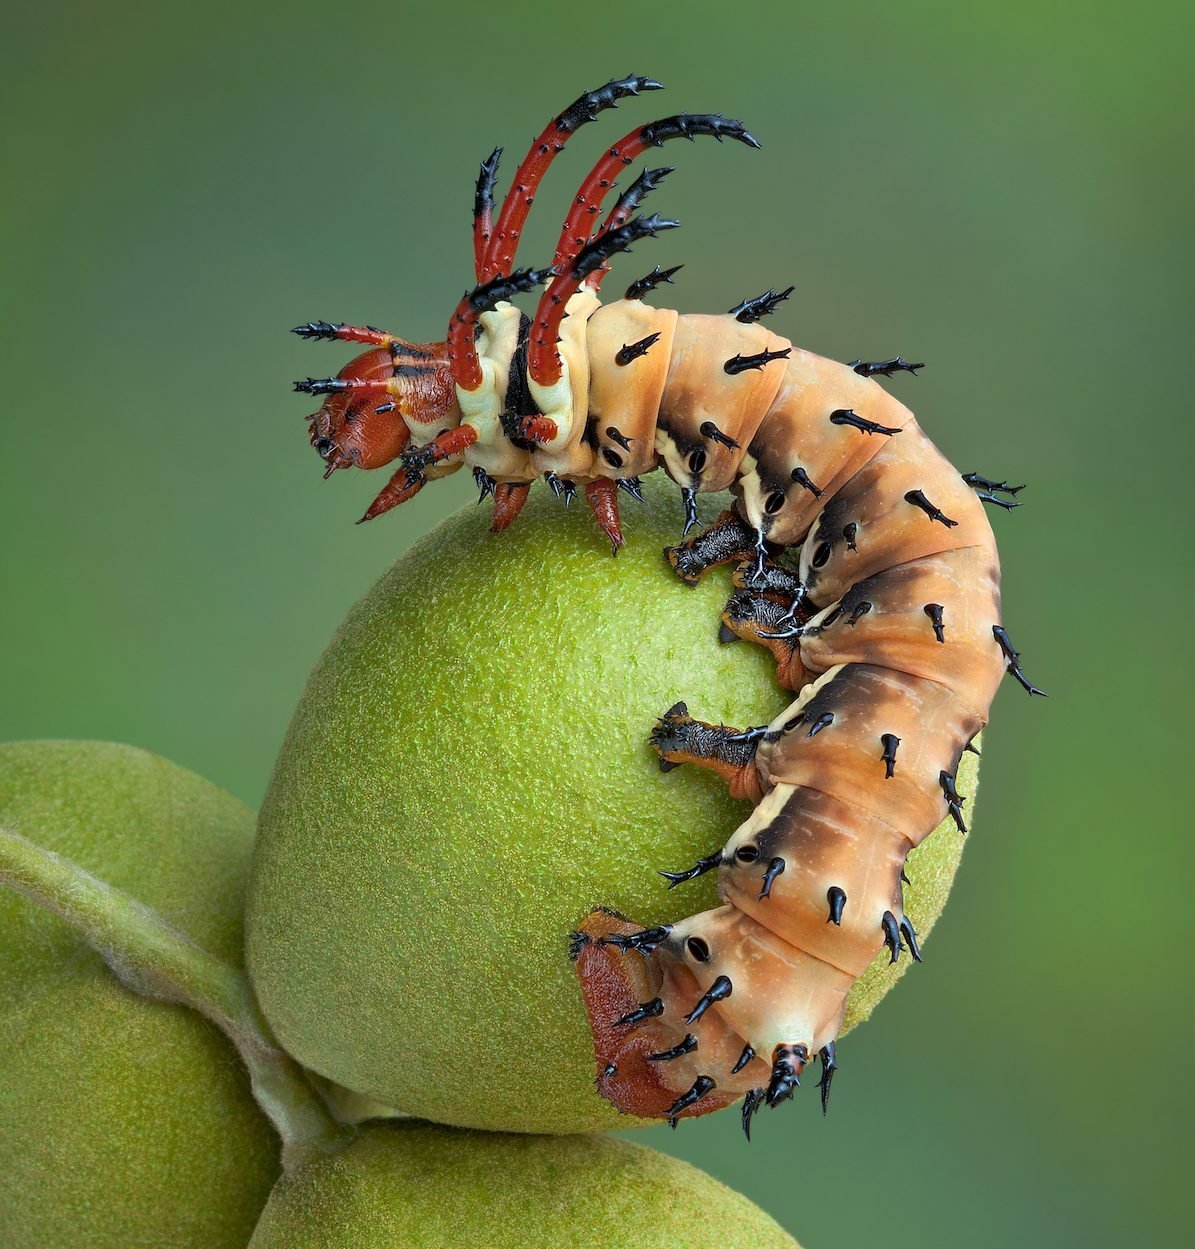 7 Fascinating Caterpillar Facts You Should Know